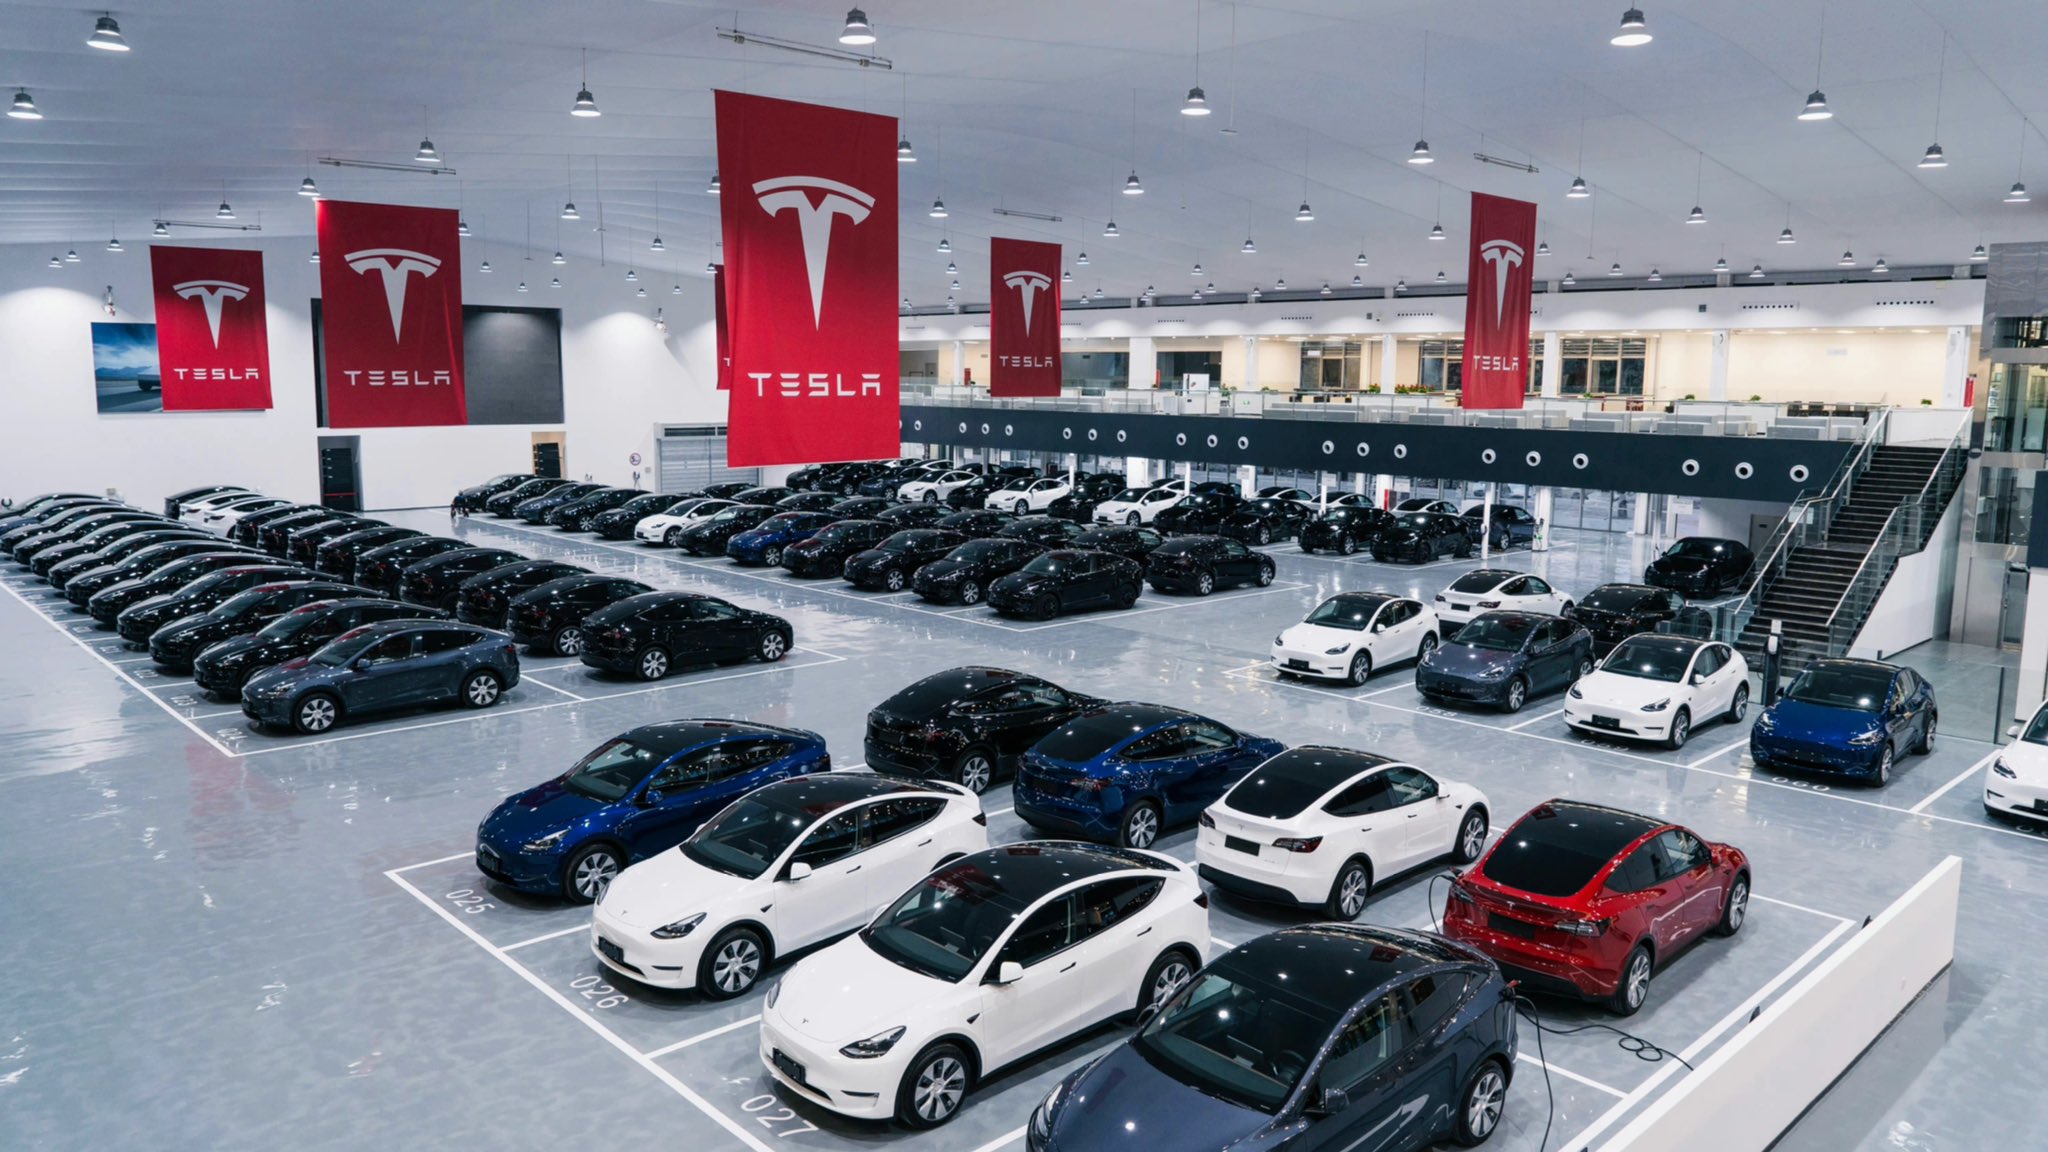 Tesla China sees 12.8k insurance registrations in August